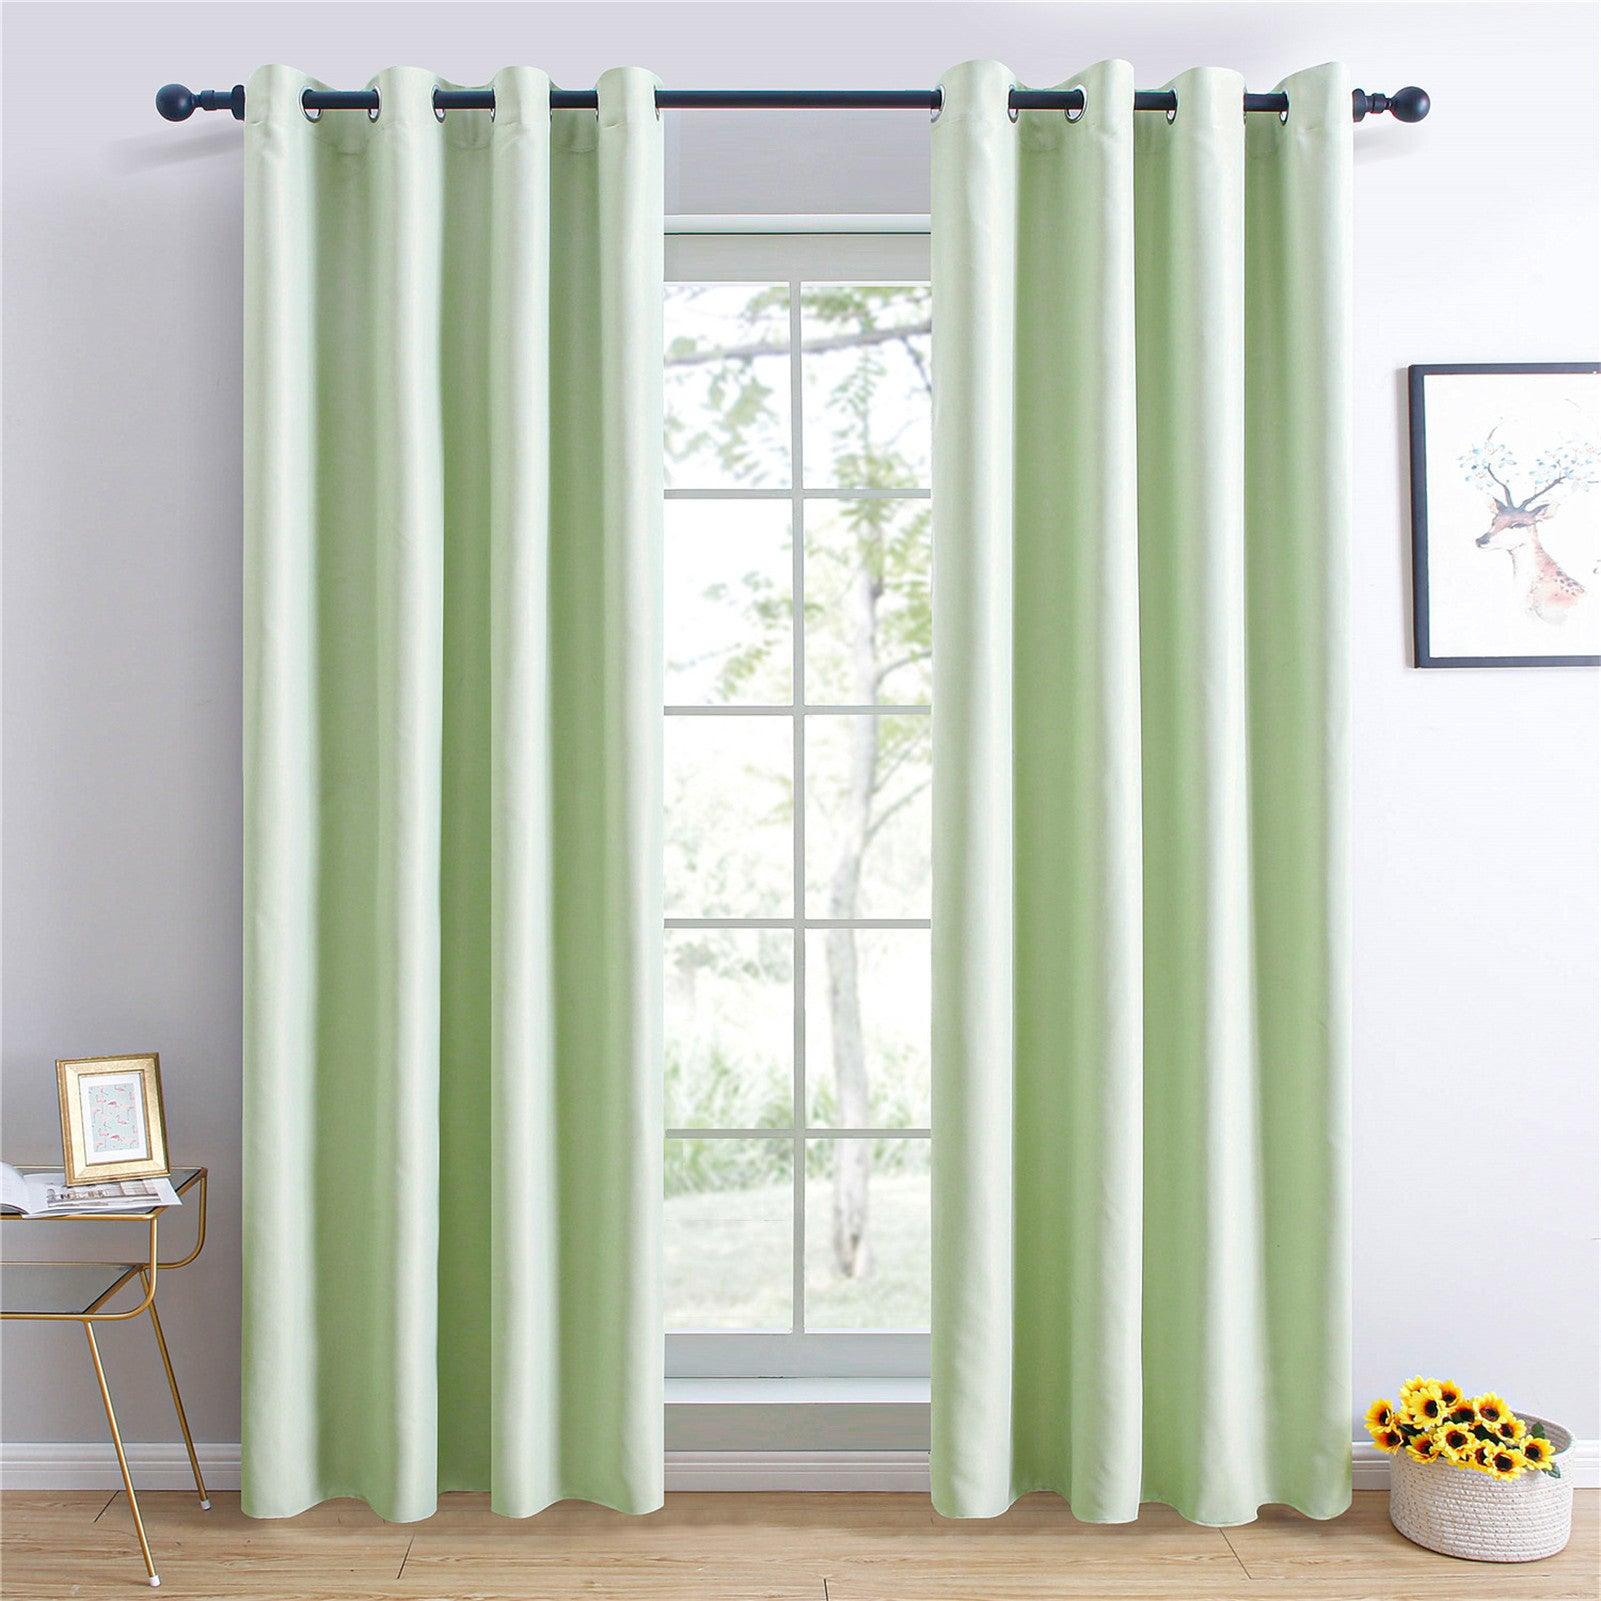 Topfinel Solid Color 100% blackout curtains for bedroom, sun zero blackout curtains - Topfinel